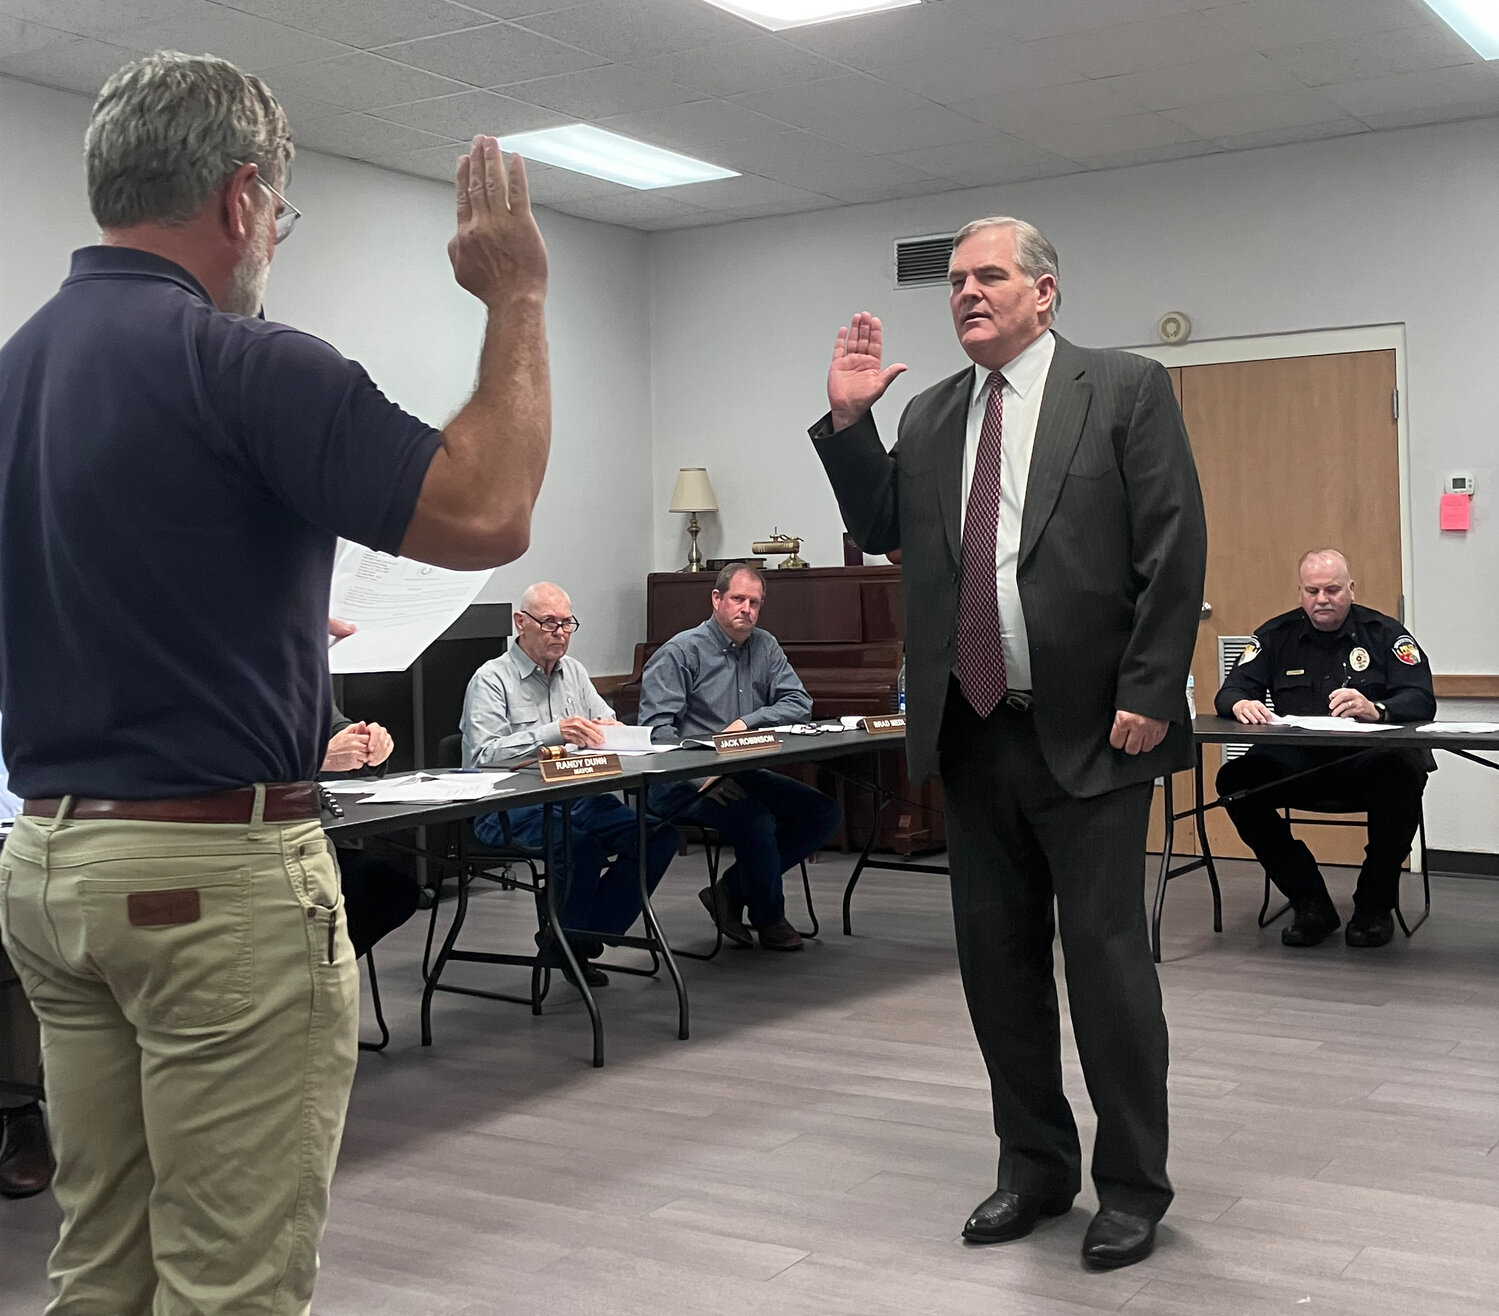 New Quitman associate municipal judge Michael King, right, is sworn in by City Administrator James Attaway at last Thursday’s city council meeting.